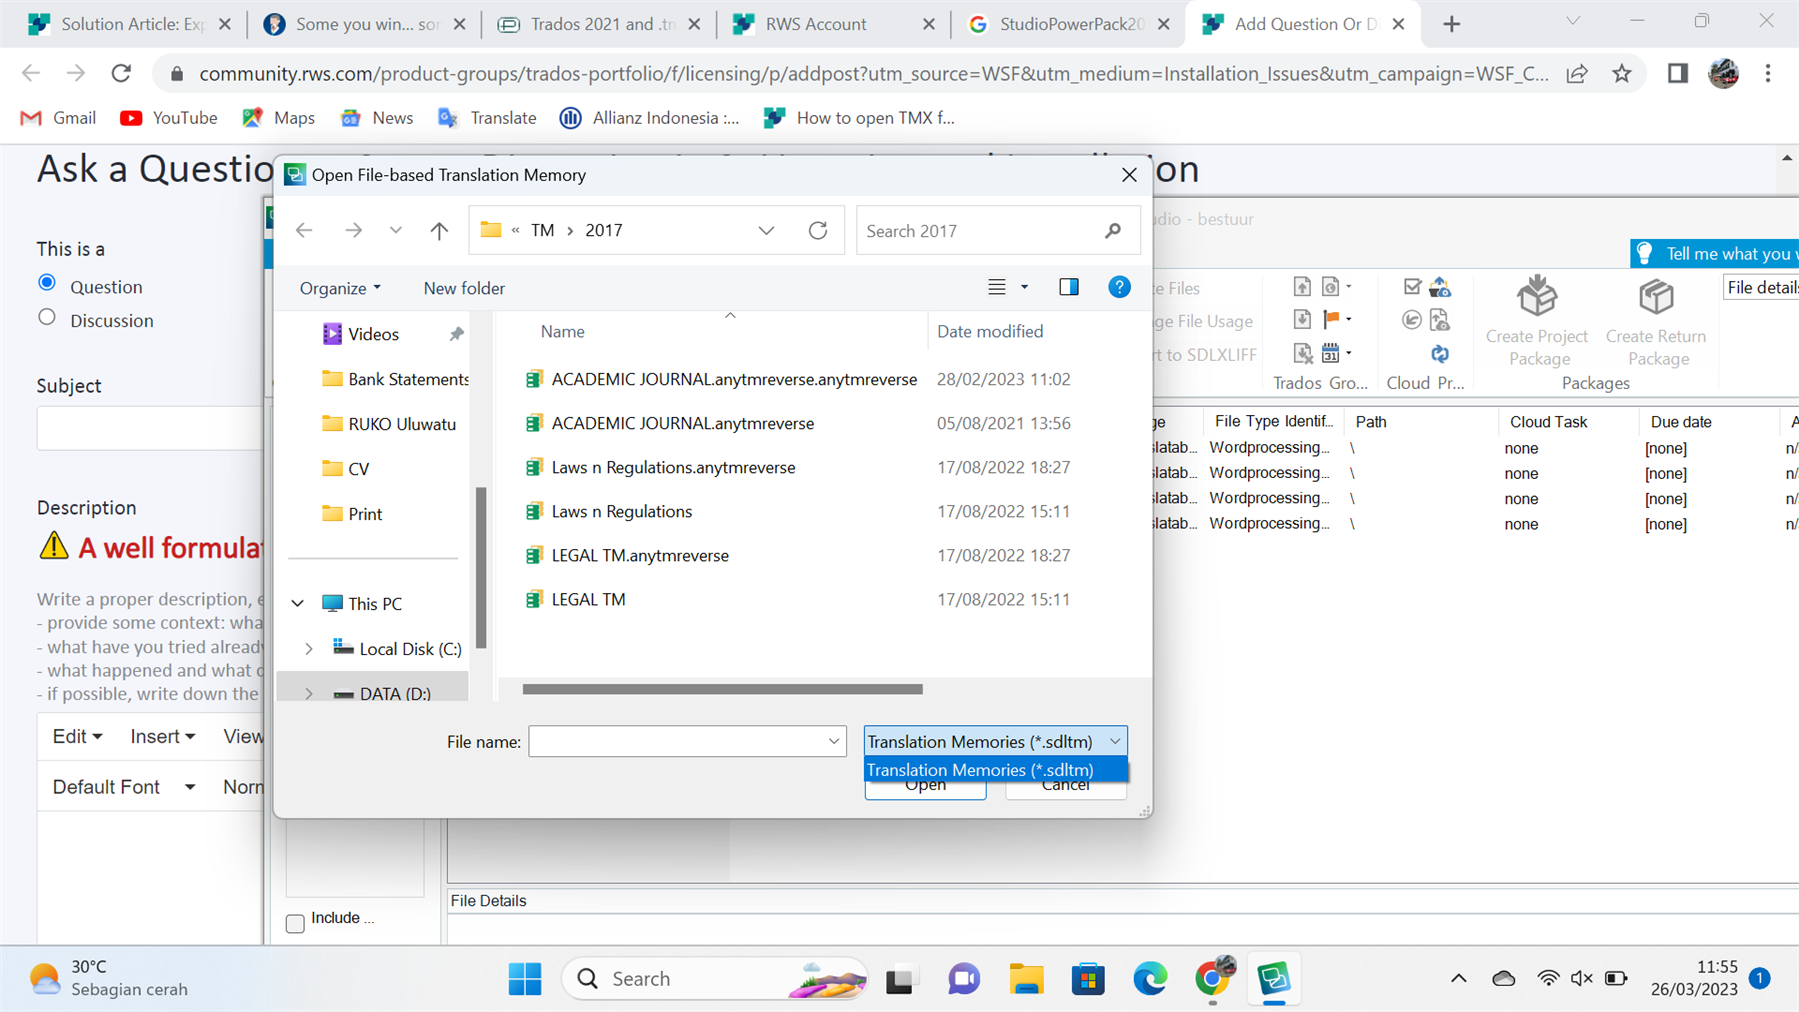 Trados Studio dialog box for opening a file-based Translation Memory with a file explorer window showing various folders and files, including 'ACADEMIC JOURNAL.anytmreverse' and 'LEGAL TM.anytmreverse'. The file type dropdown is set to 'Translation Memories (*.sdltm)'.